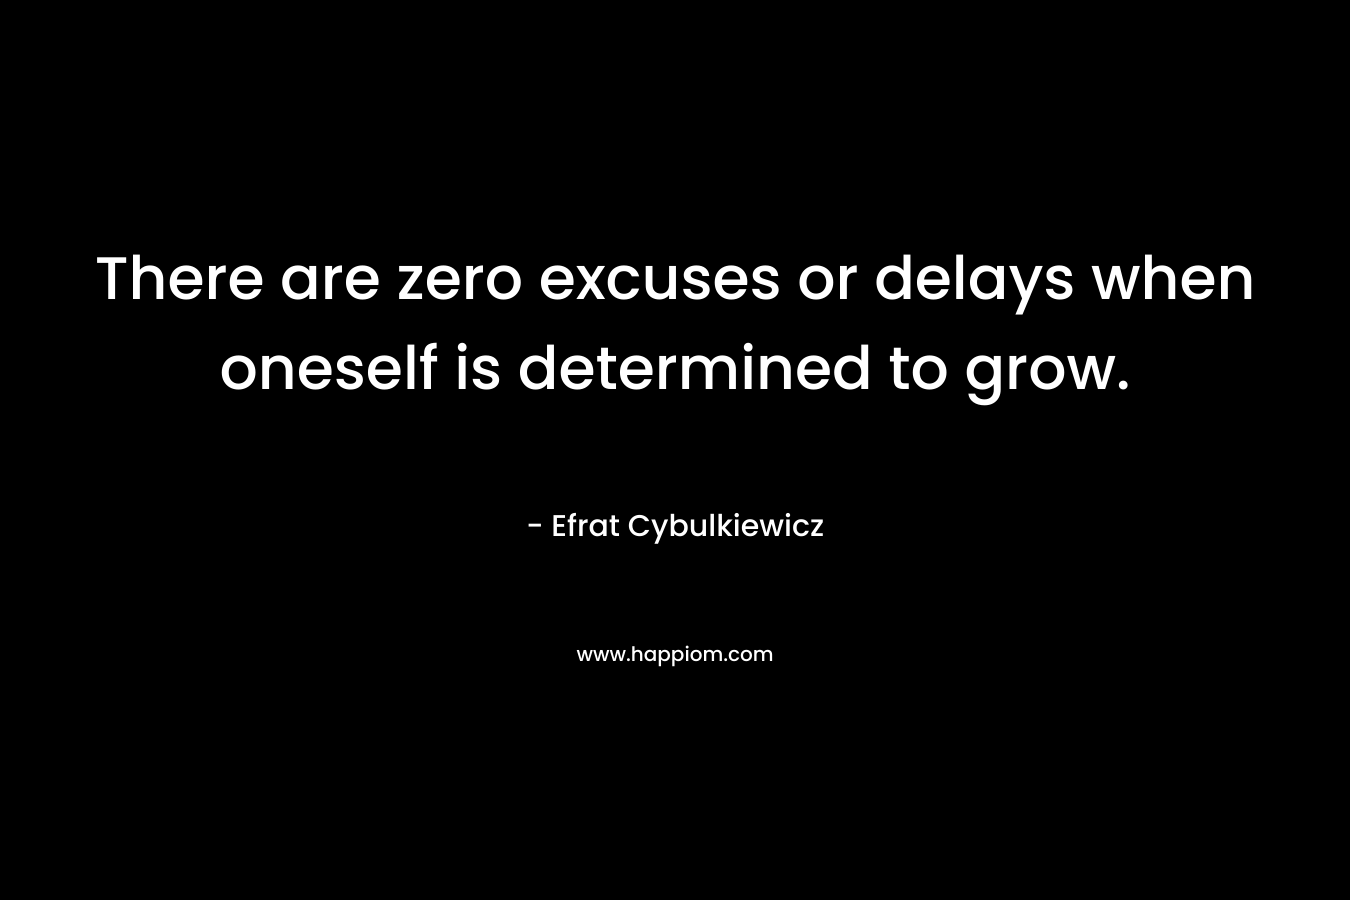 There are zero excuses or delays when oneself is determined to grow. – Efrat Cybulkiewicz